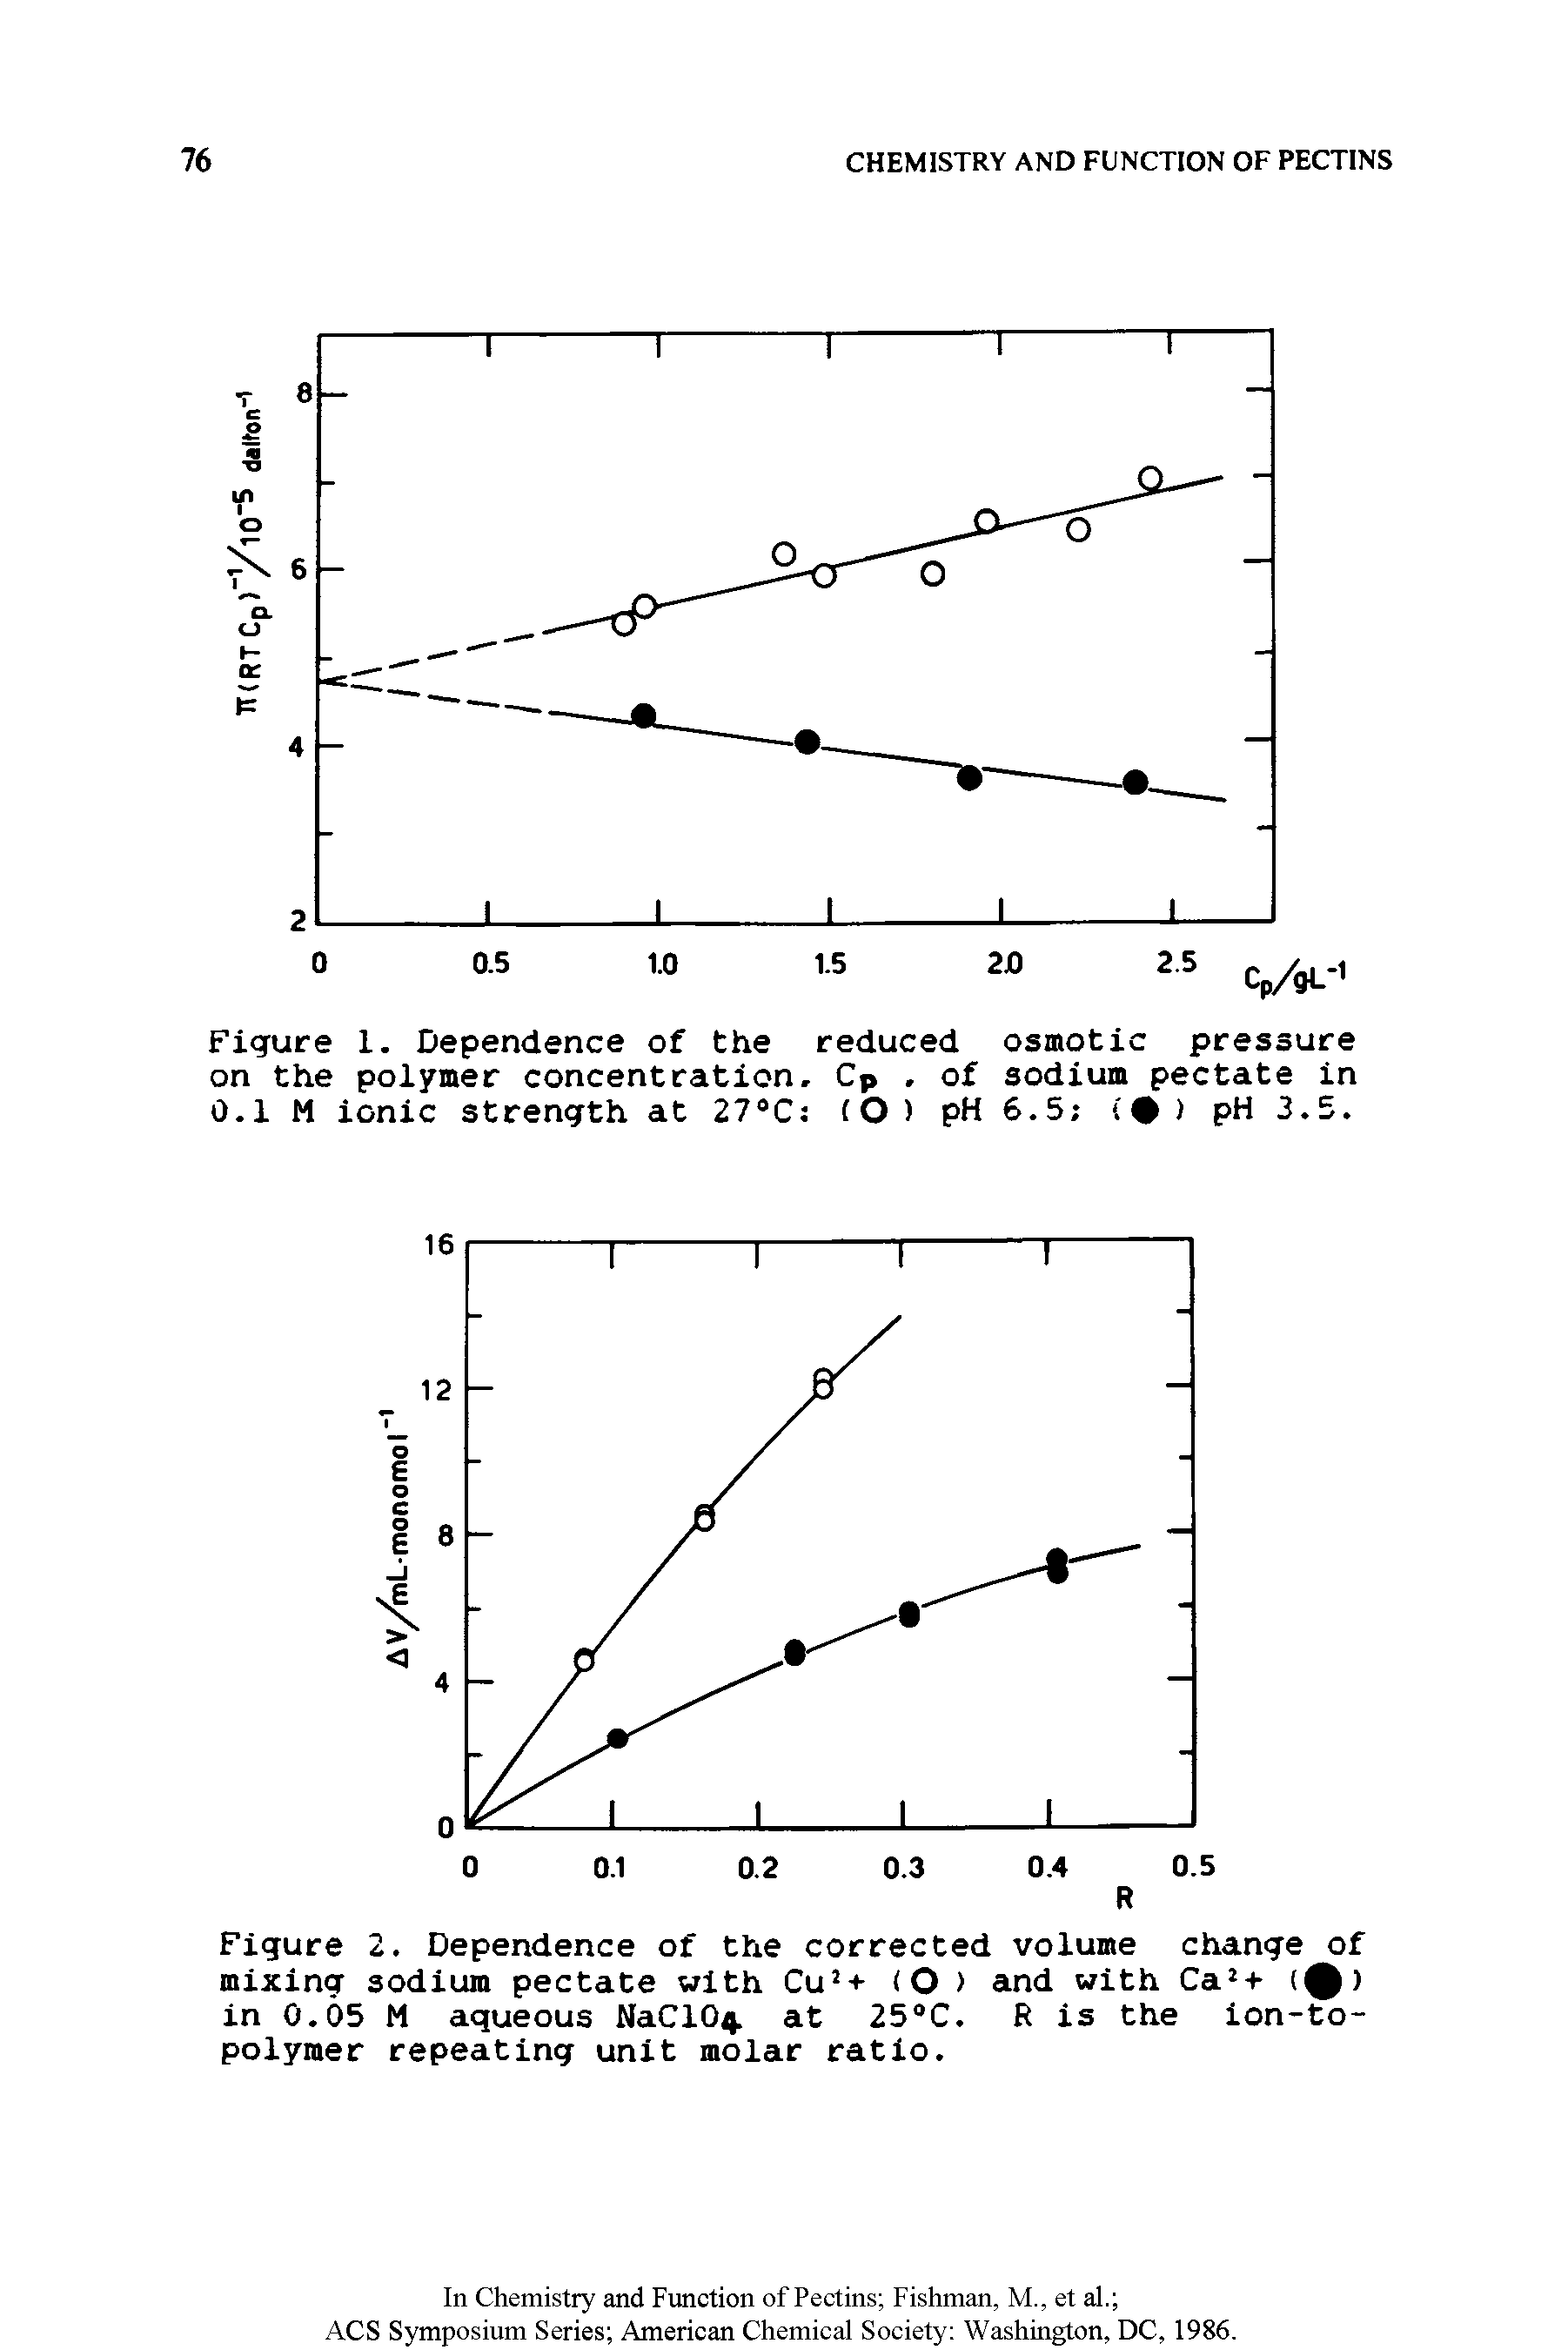 Figure 2. Dependence of the corrected volume change of mixing sodium pectate with Cu + <0 > and with Ca + ( ) in 0.05 M aqueous NaC104. at 25 C. R is the ion-to-polymer repeating unit molar ratio.